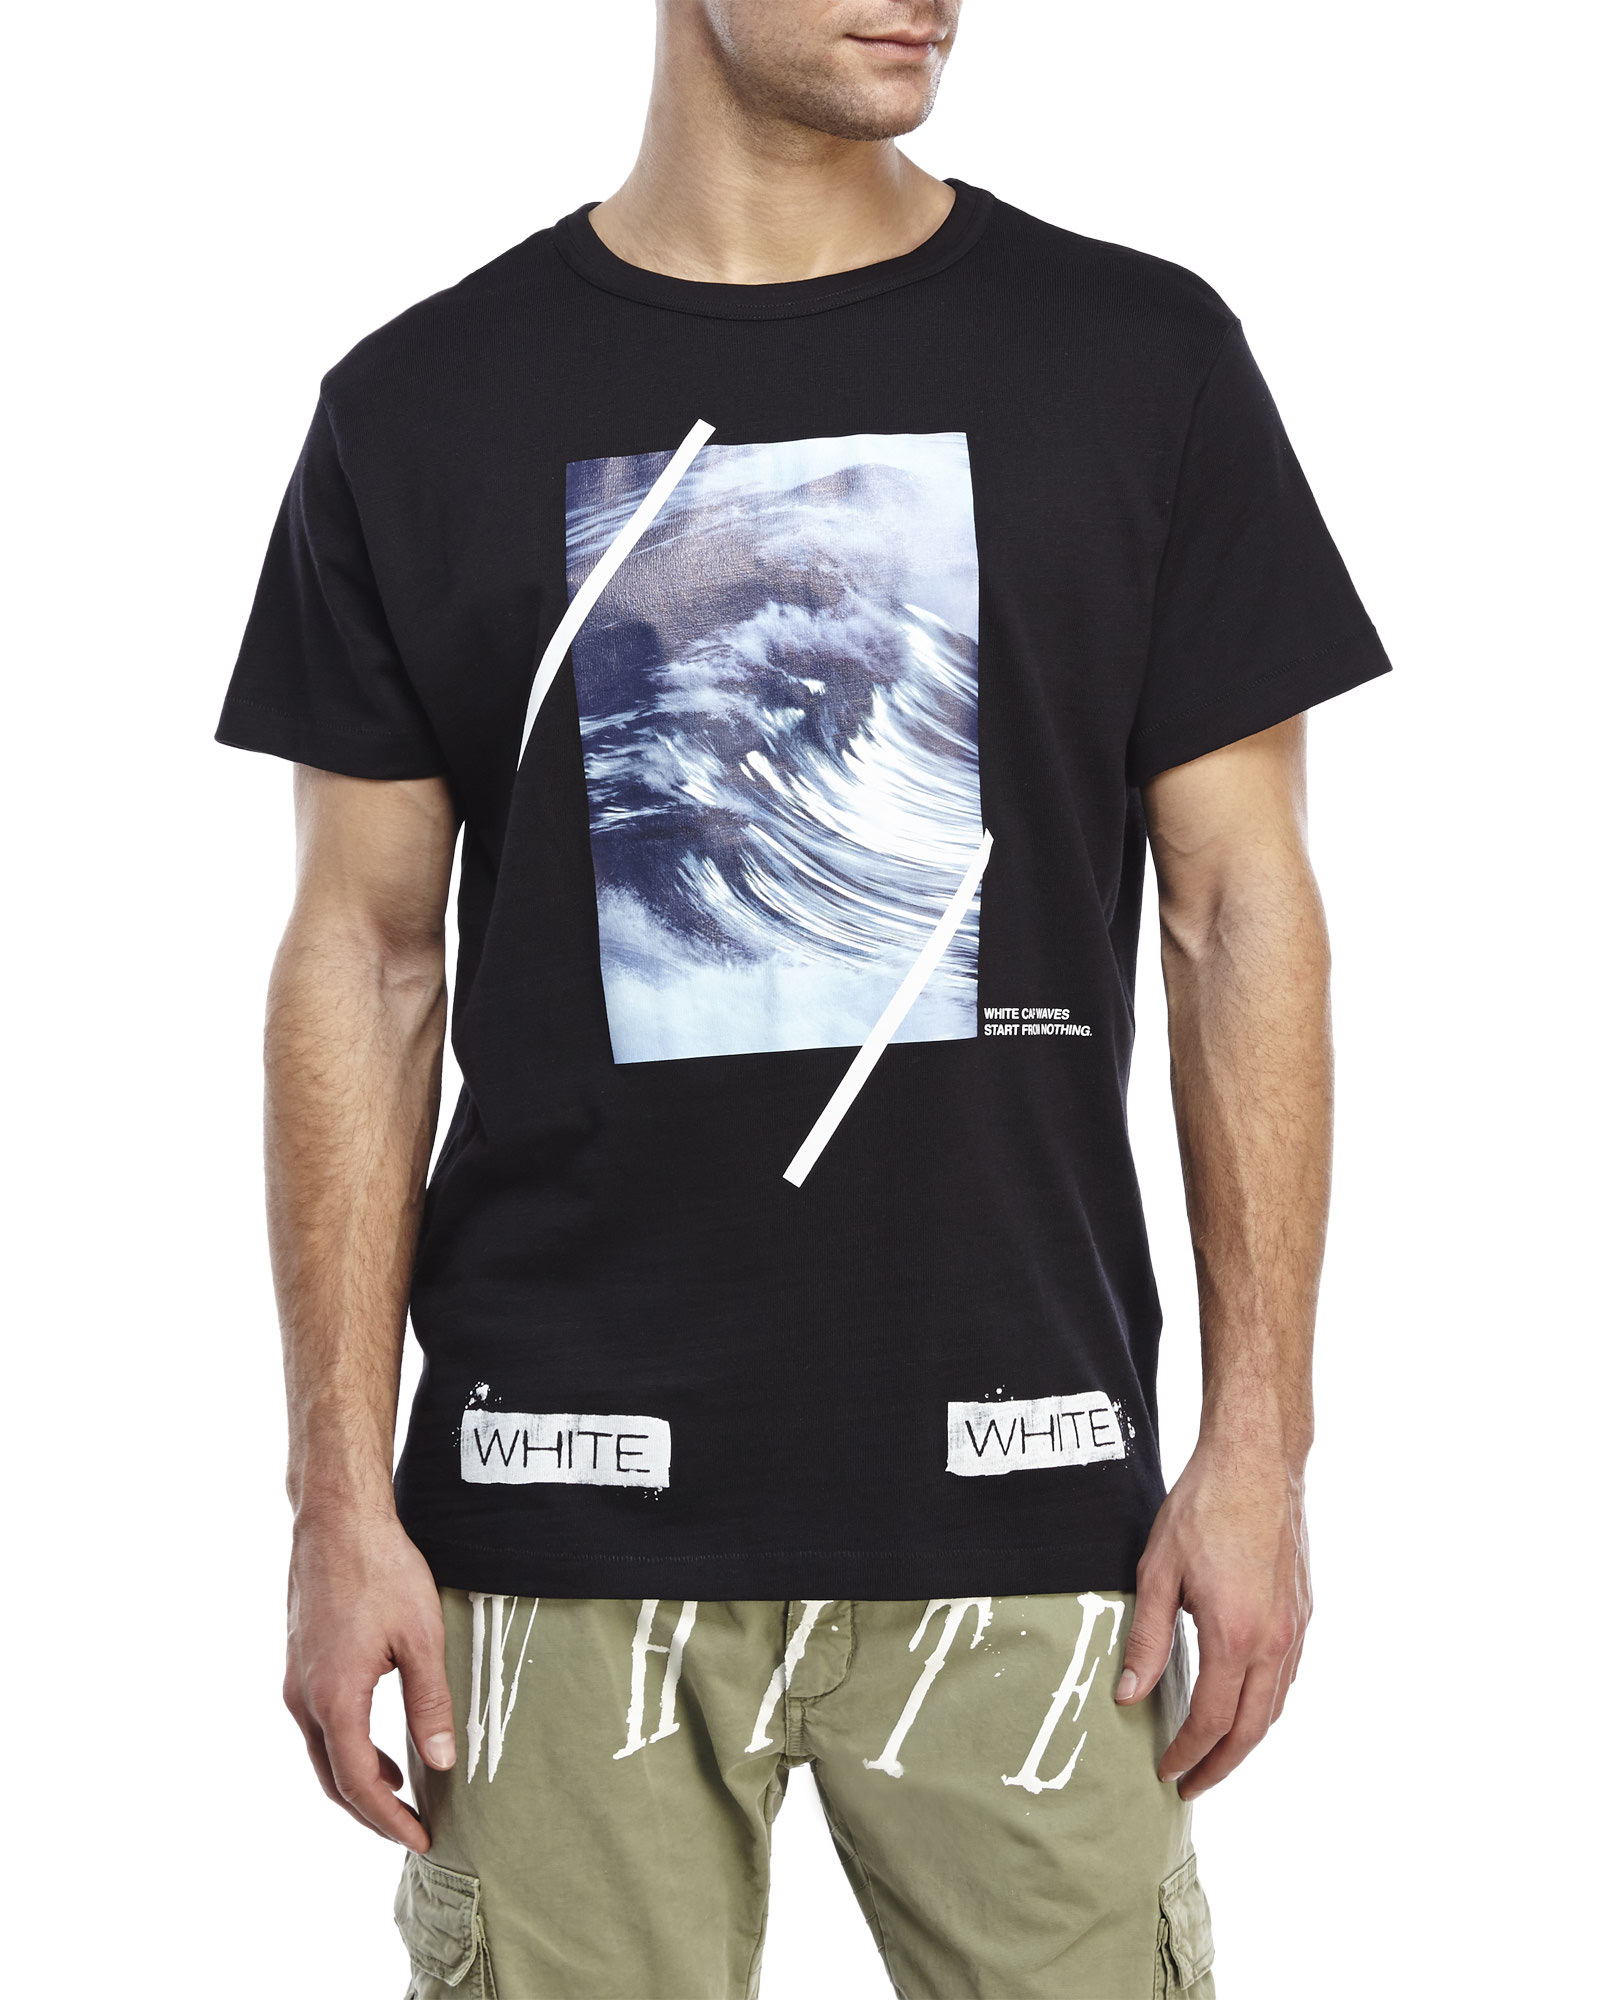 Off White Wave T Shirt Shop, 55% OFF | www.smokymountains.org